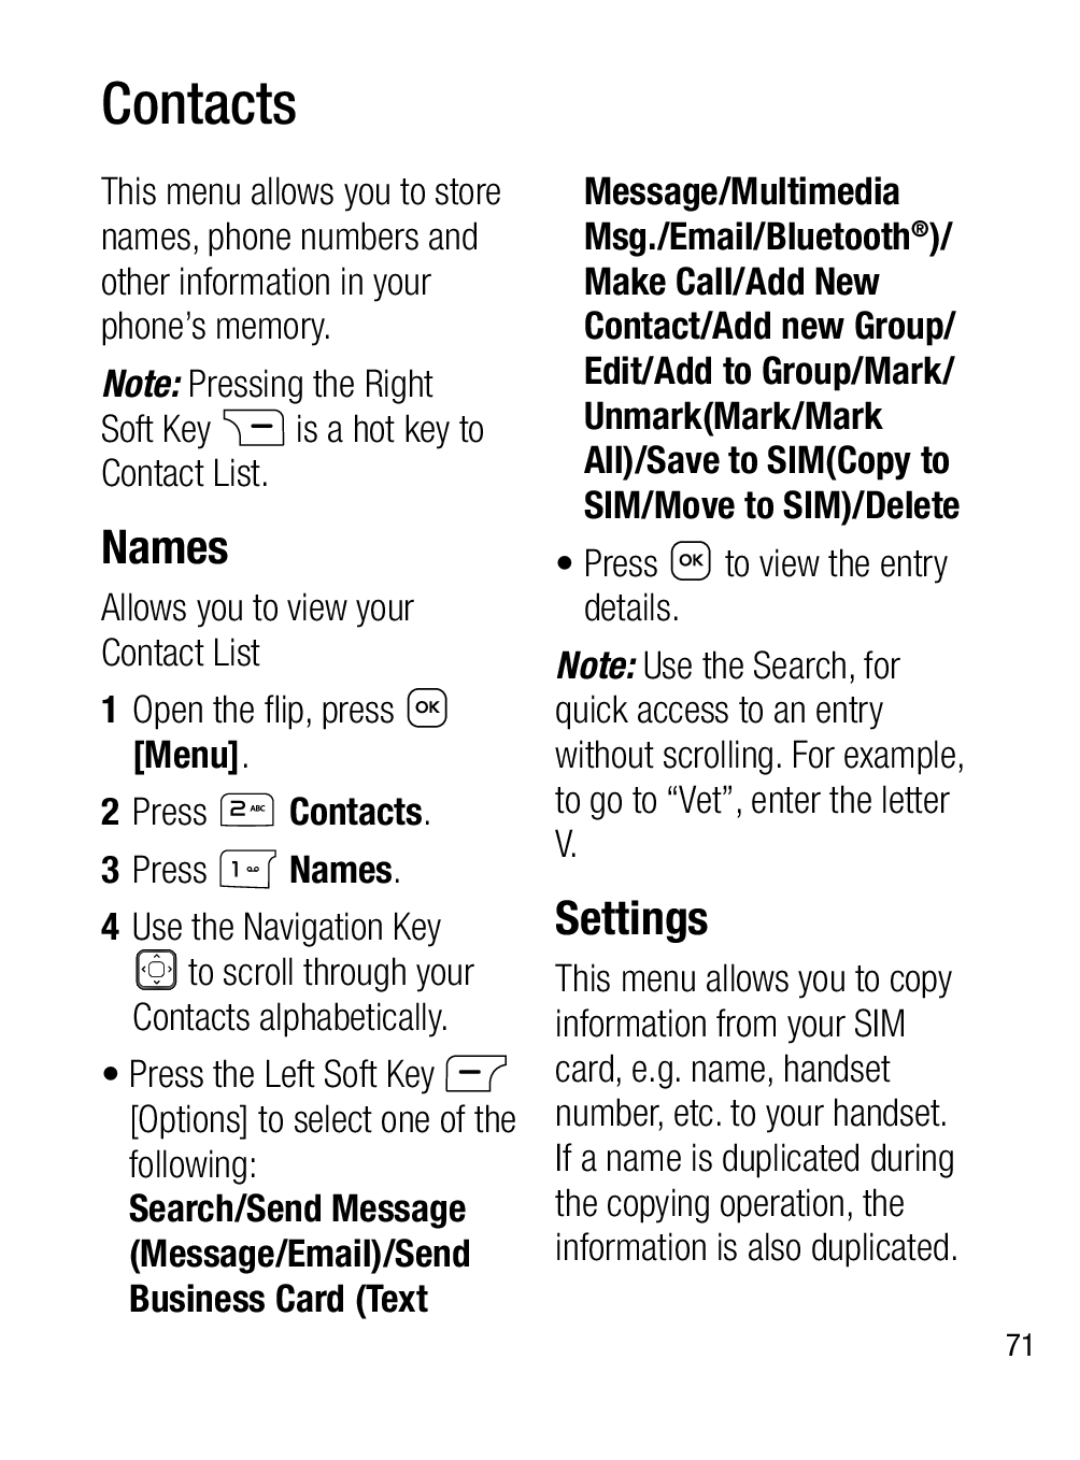 LG Electronics A133CH manual Contacts, Names, Settings 